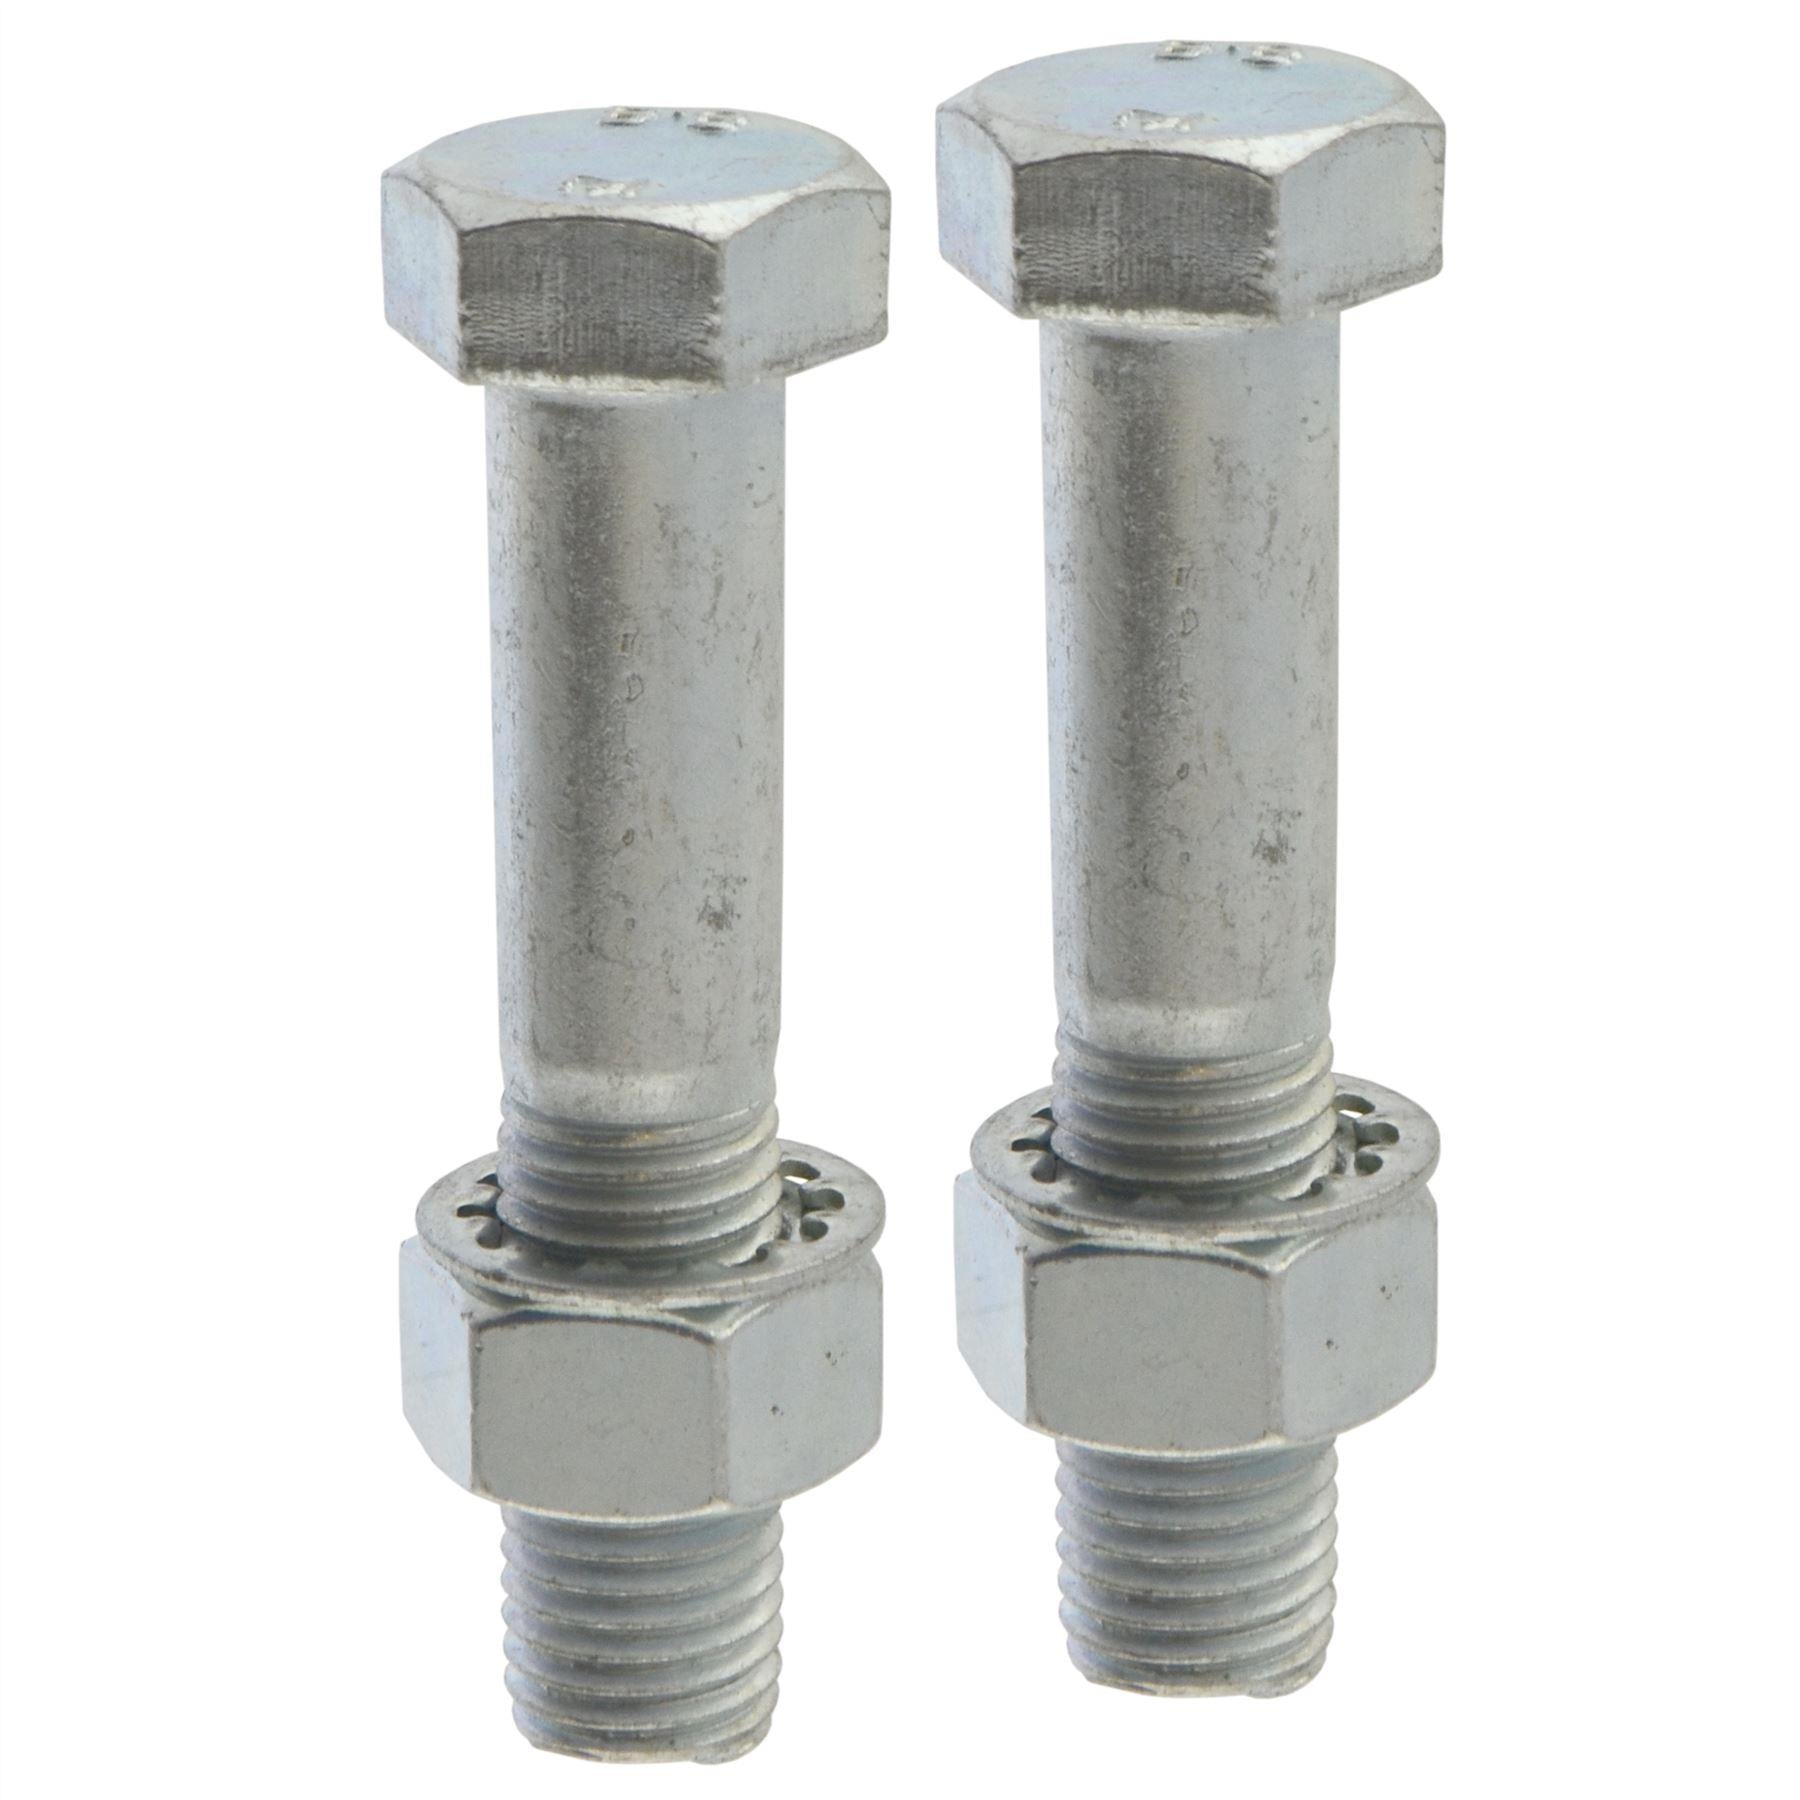 PAIR Tow Bar / Tow Ball Bolts with Nuts & Washers HIGH TENSILE